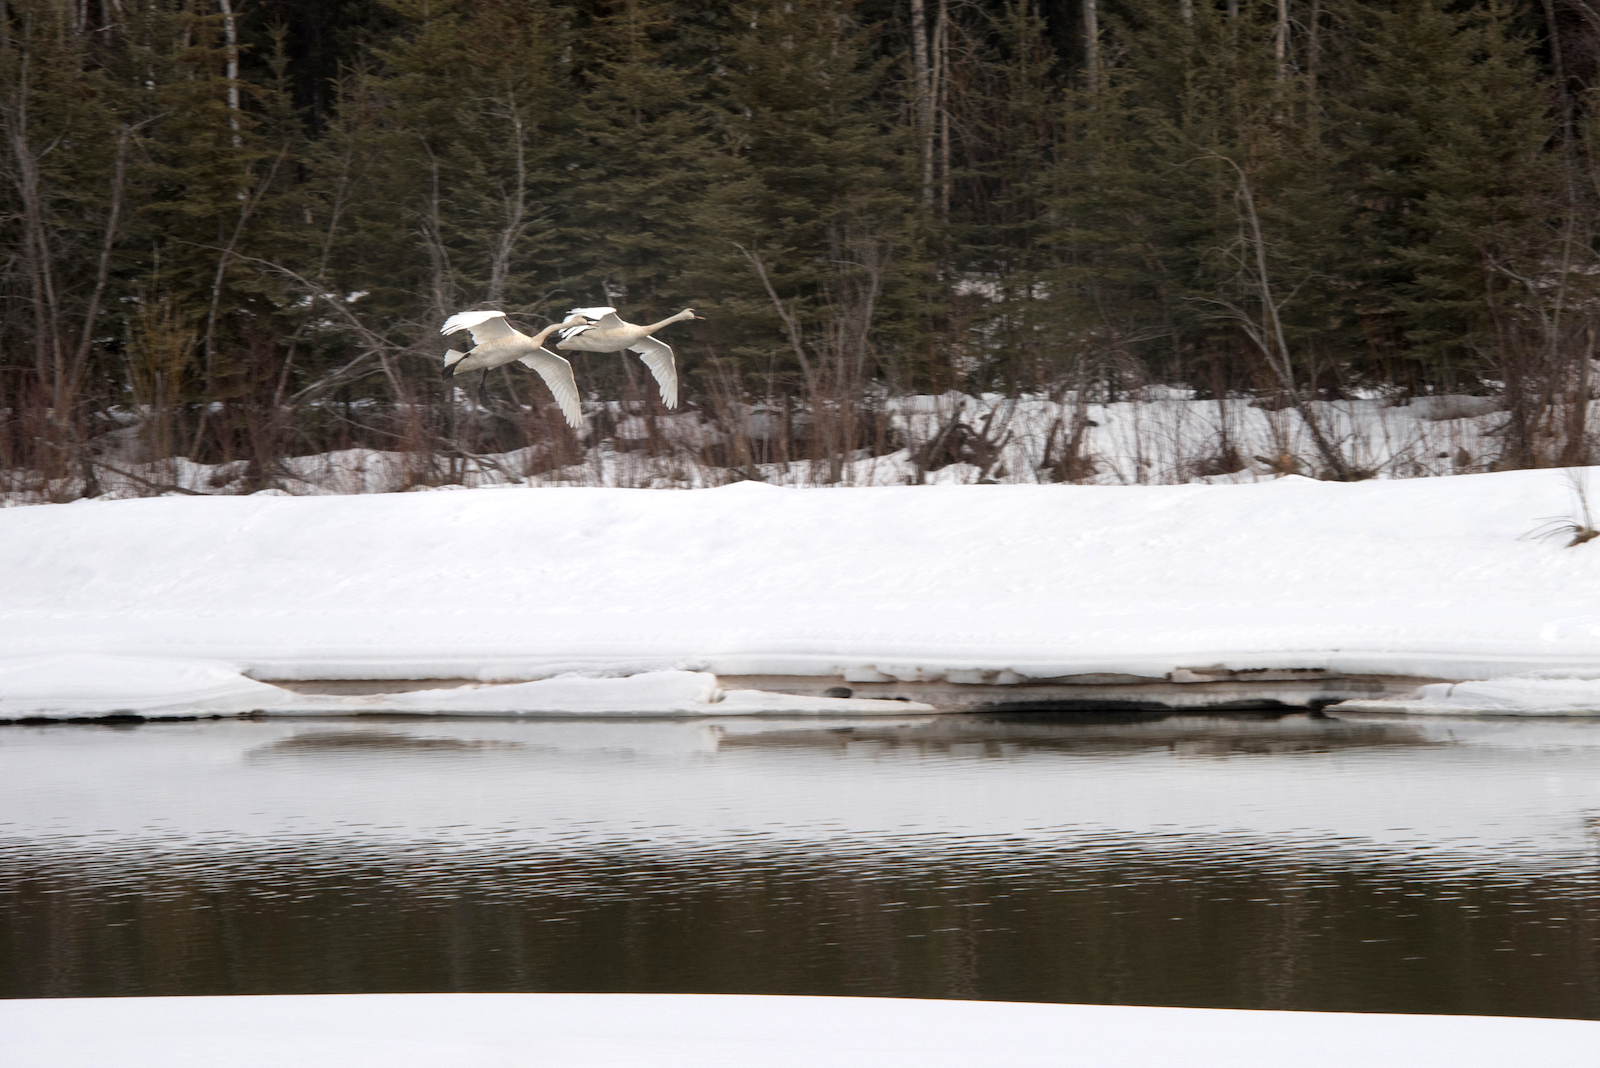 two birds fly over a snowy lake